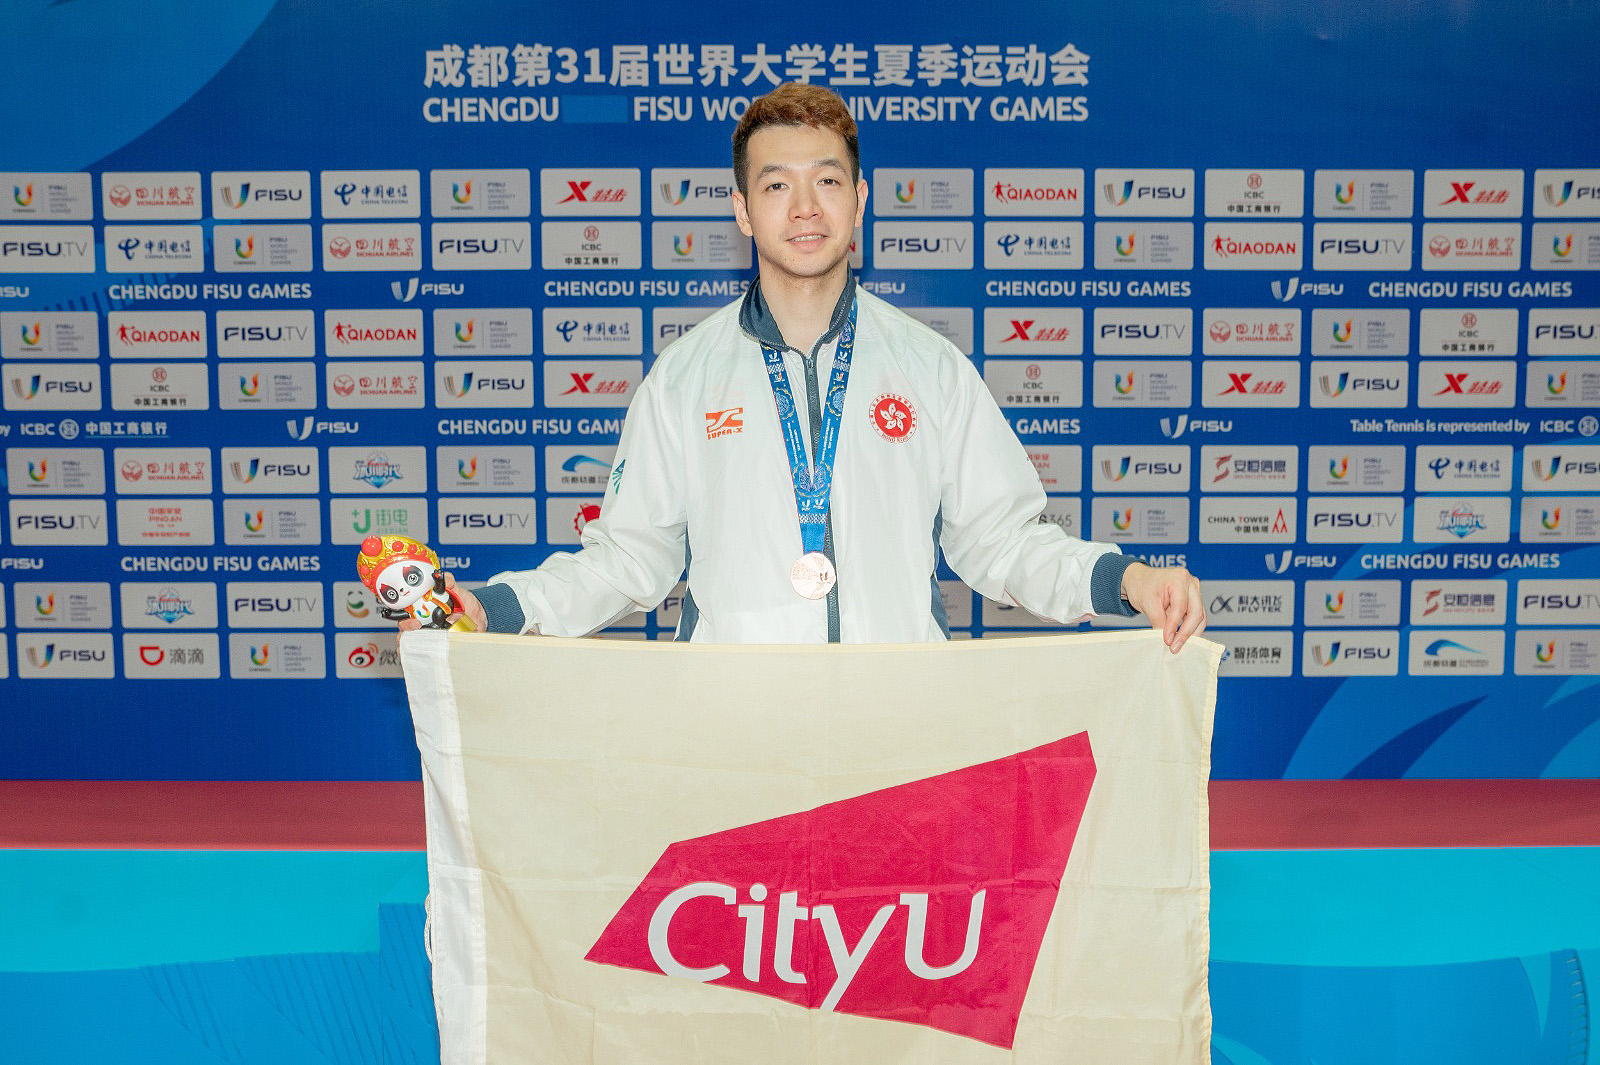 Anson Ho Kwan-kit, a student-athlete at CityU won a bronze medal in the table tennis mixed doubles with his partner at the Chengdu FISU World University Games.